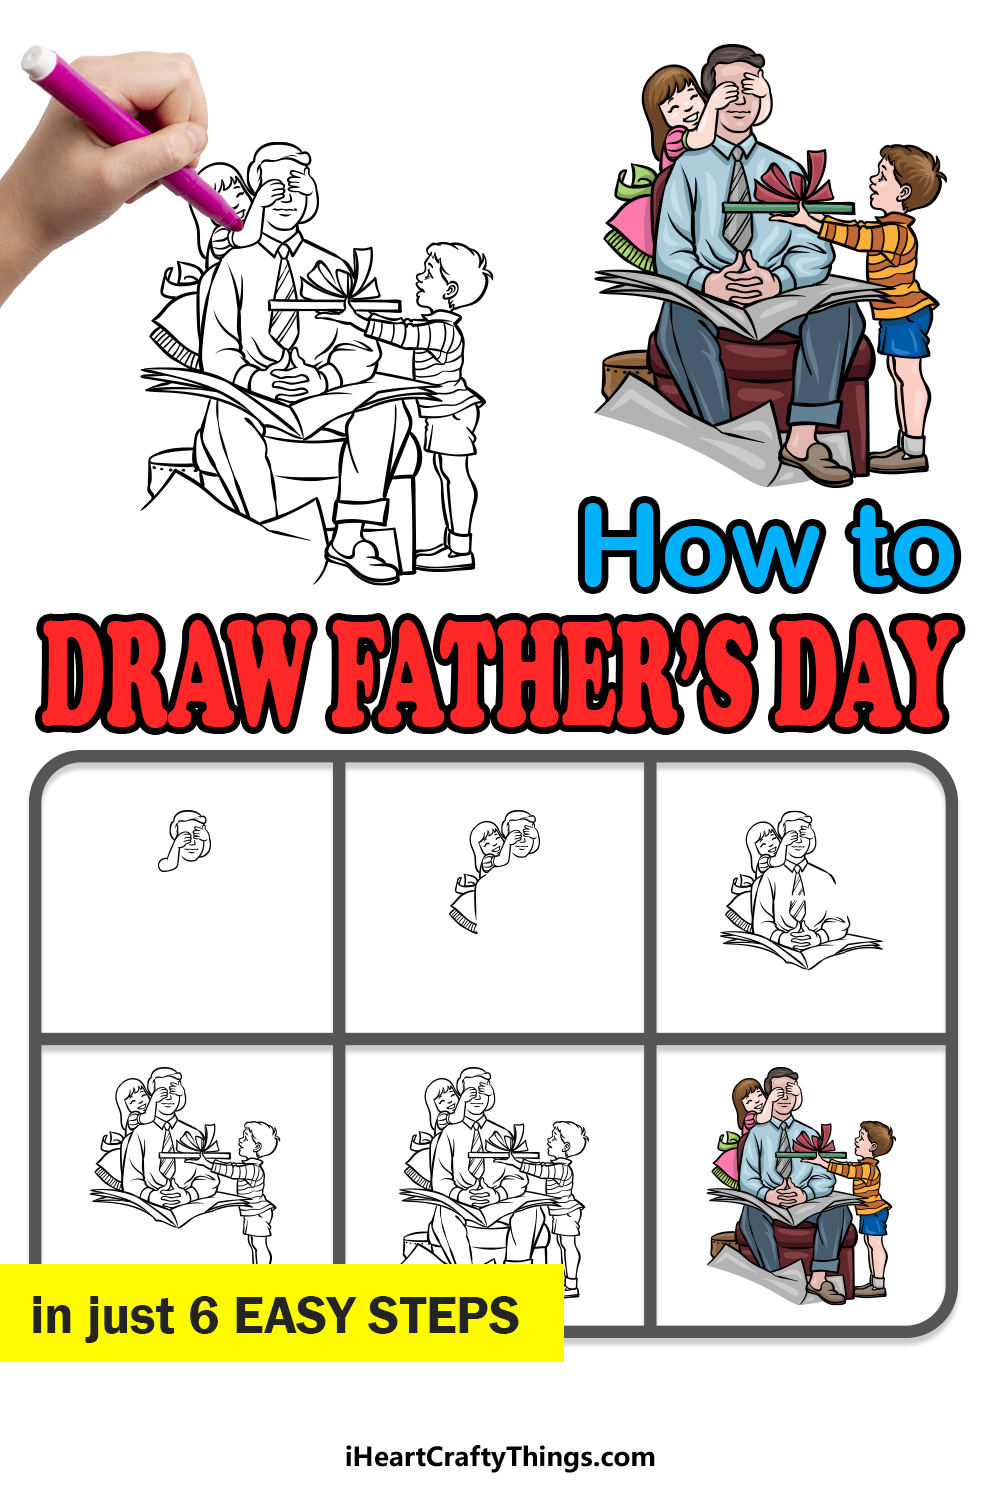 How to Draw Father’s Day in 6 easy steps